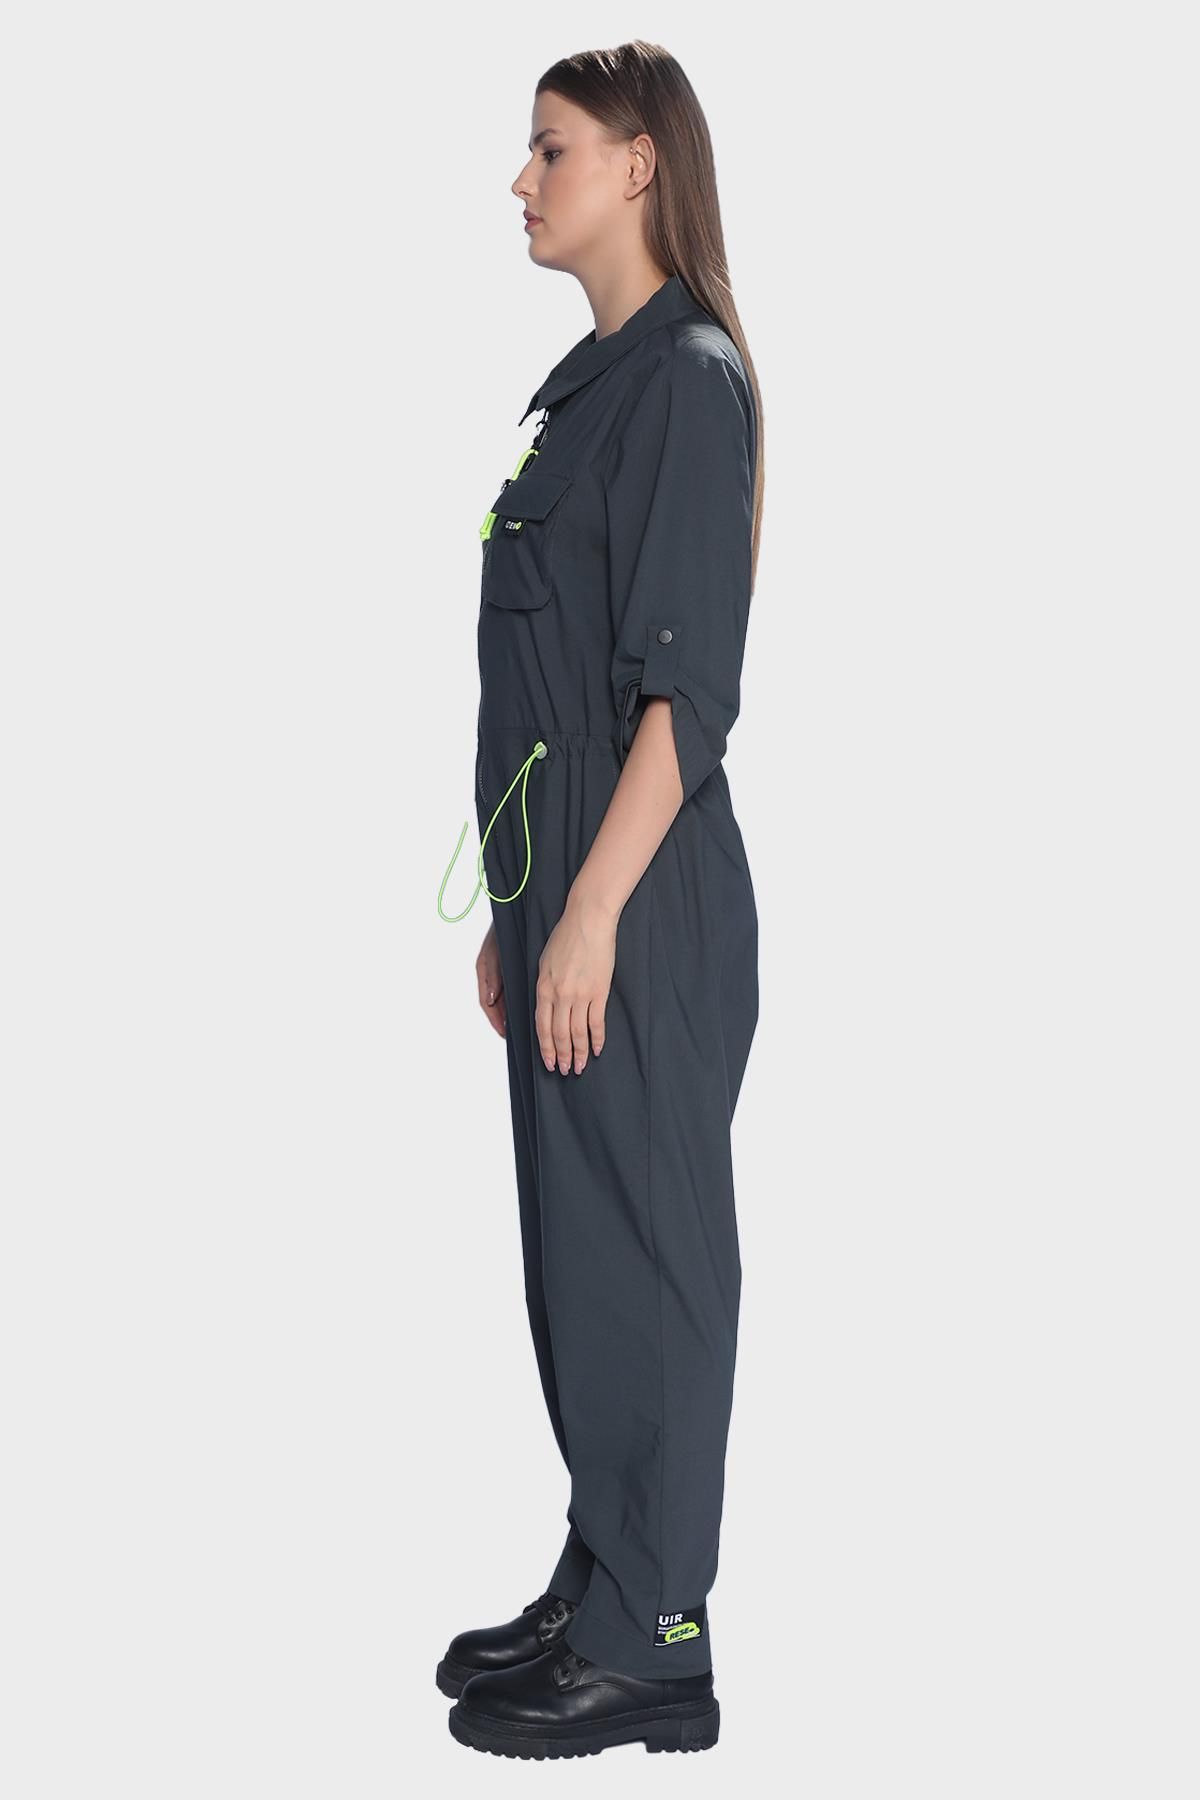 Plus Size Womens Sports Style Jumpsuit with Zipper at the Front - Grey